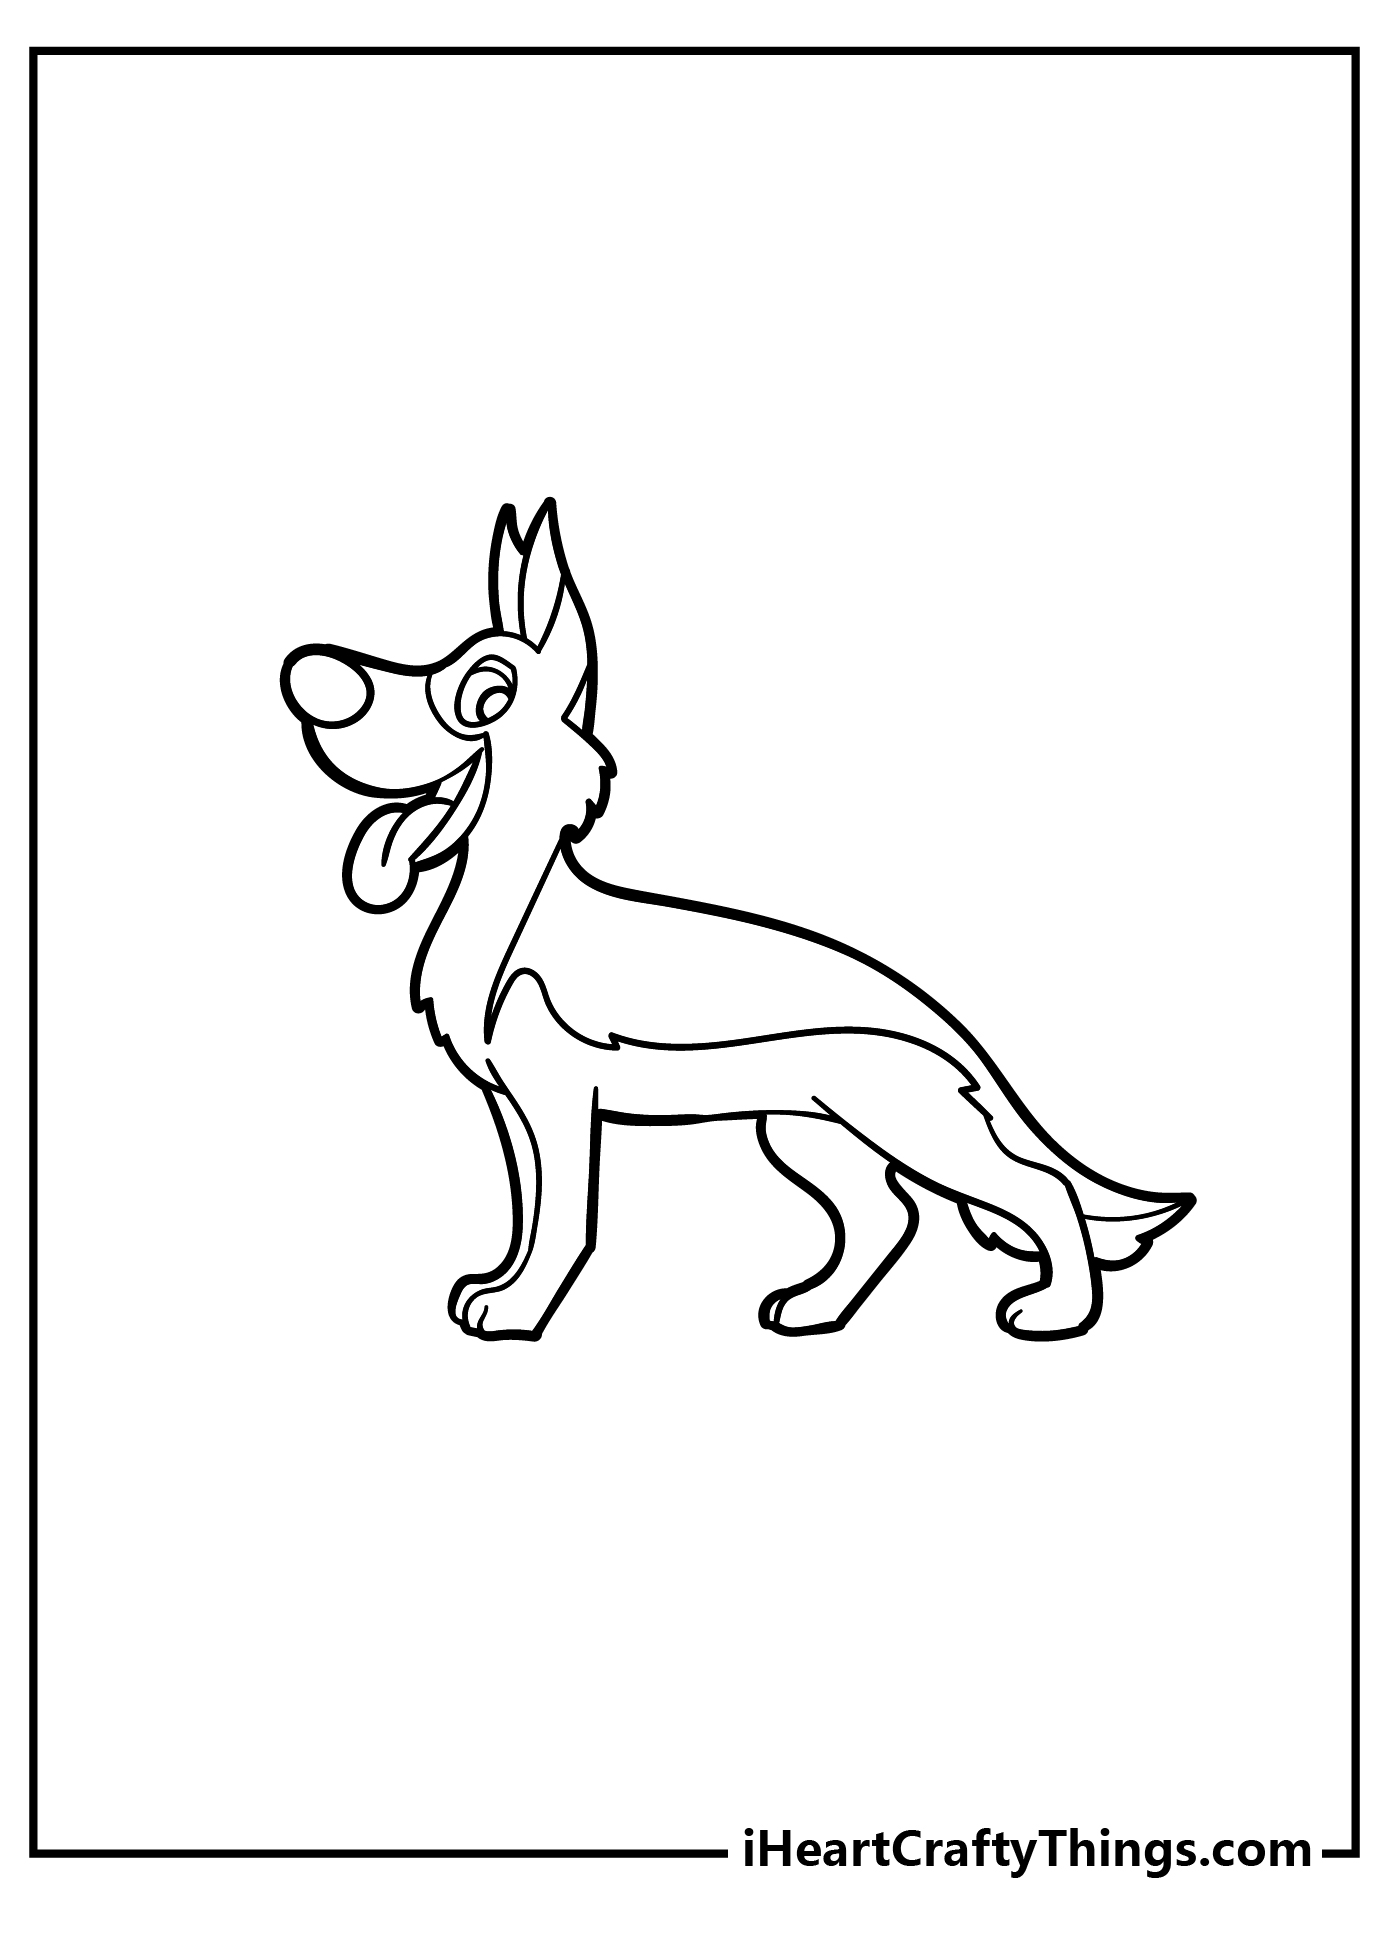 German Shepherd Coloring Pages for adults free printable